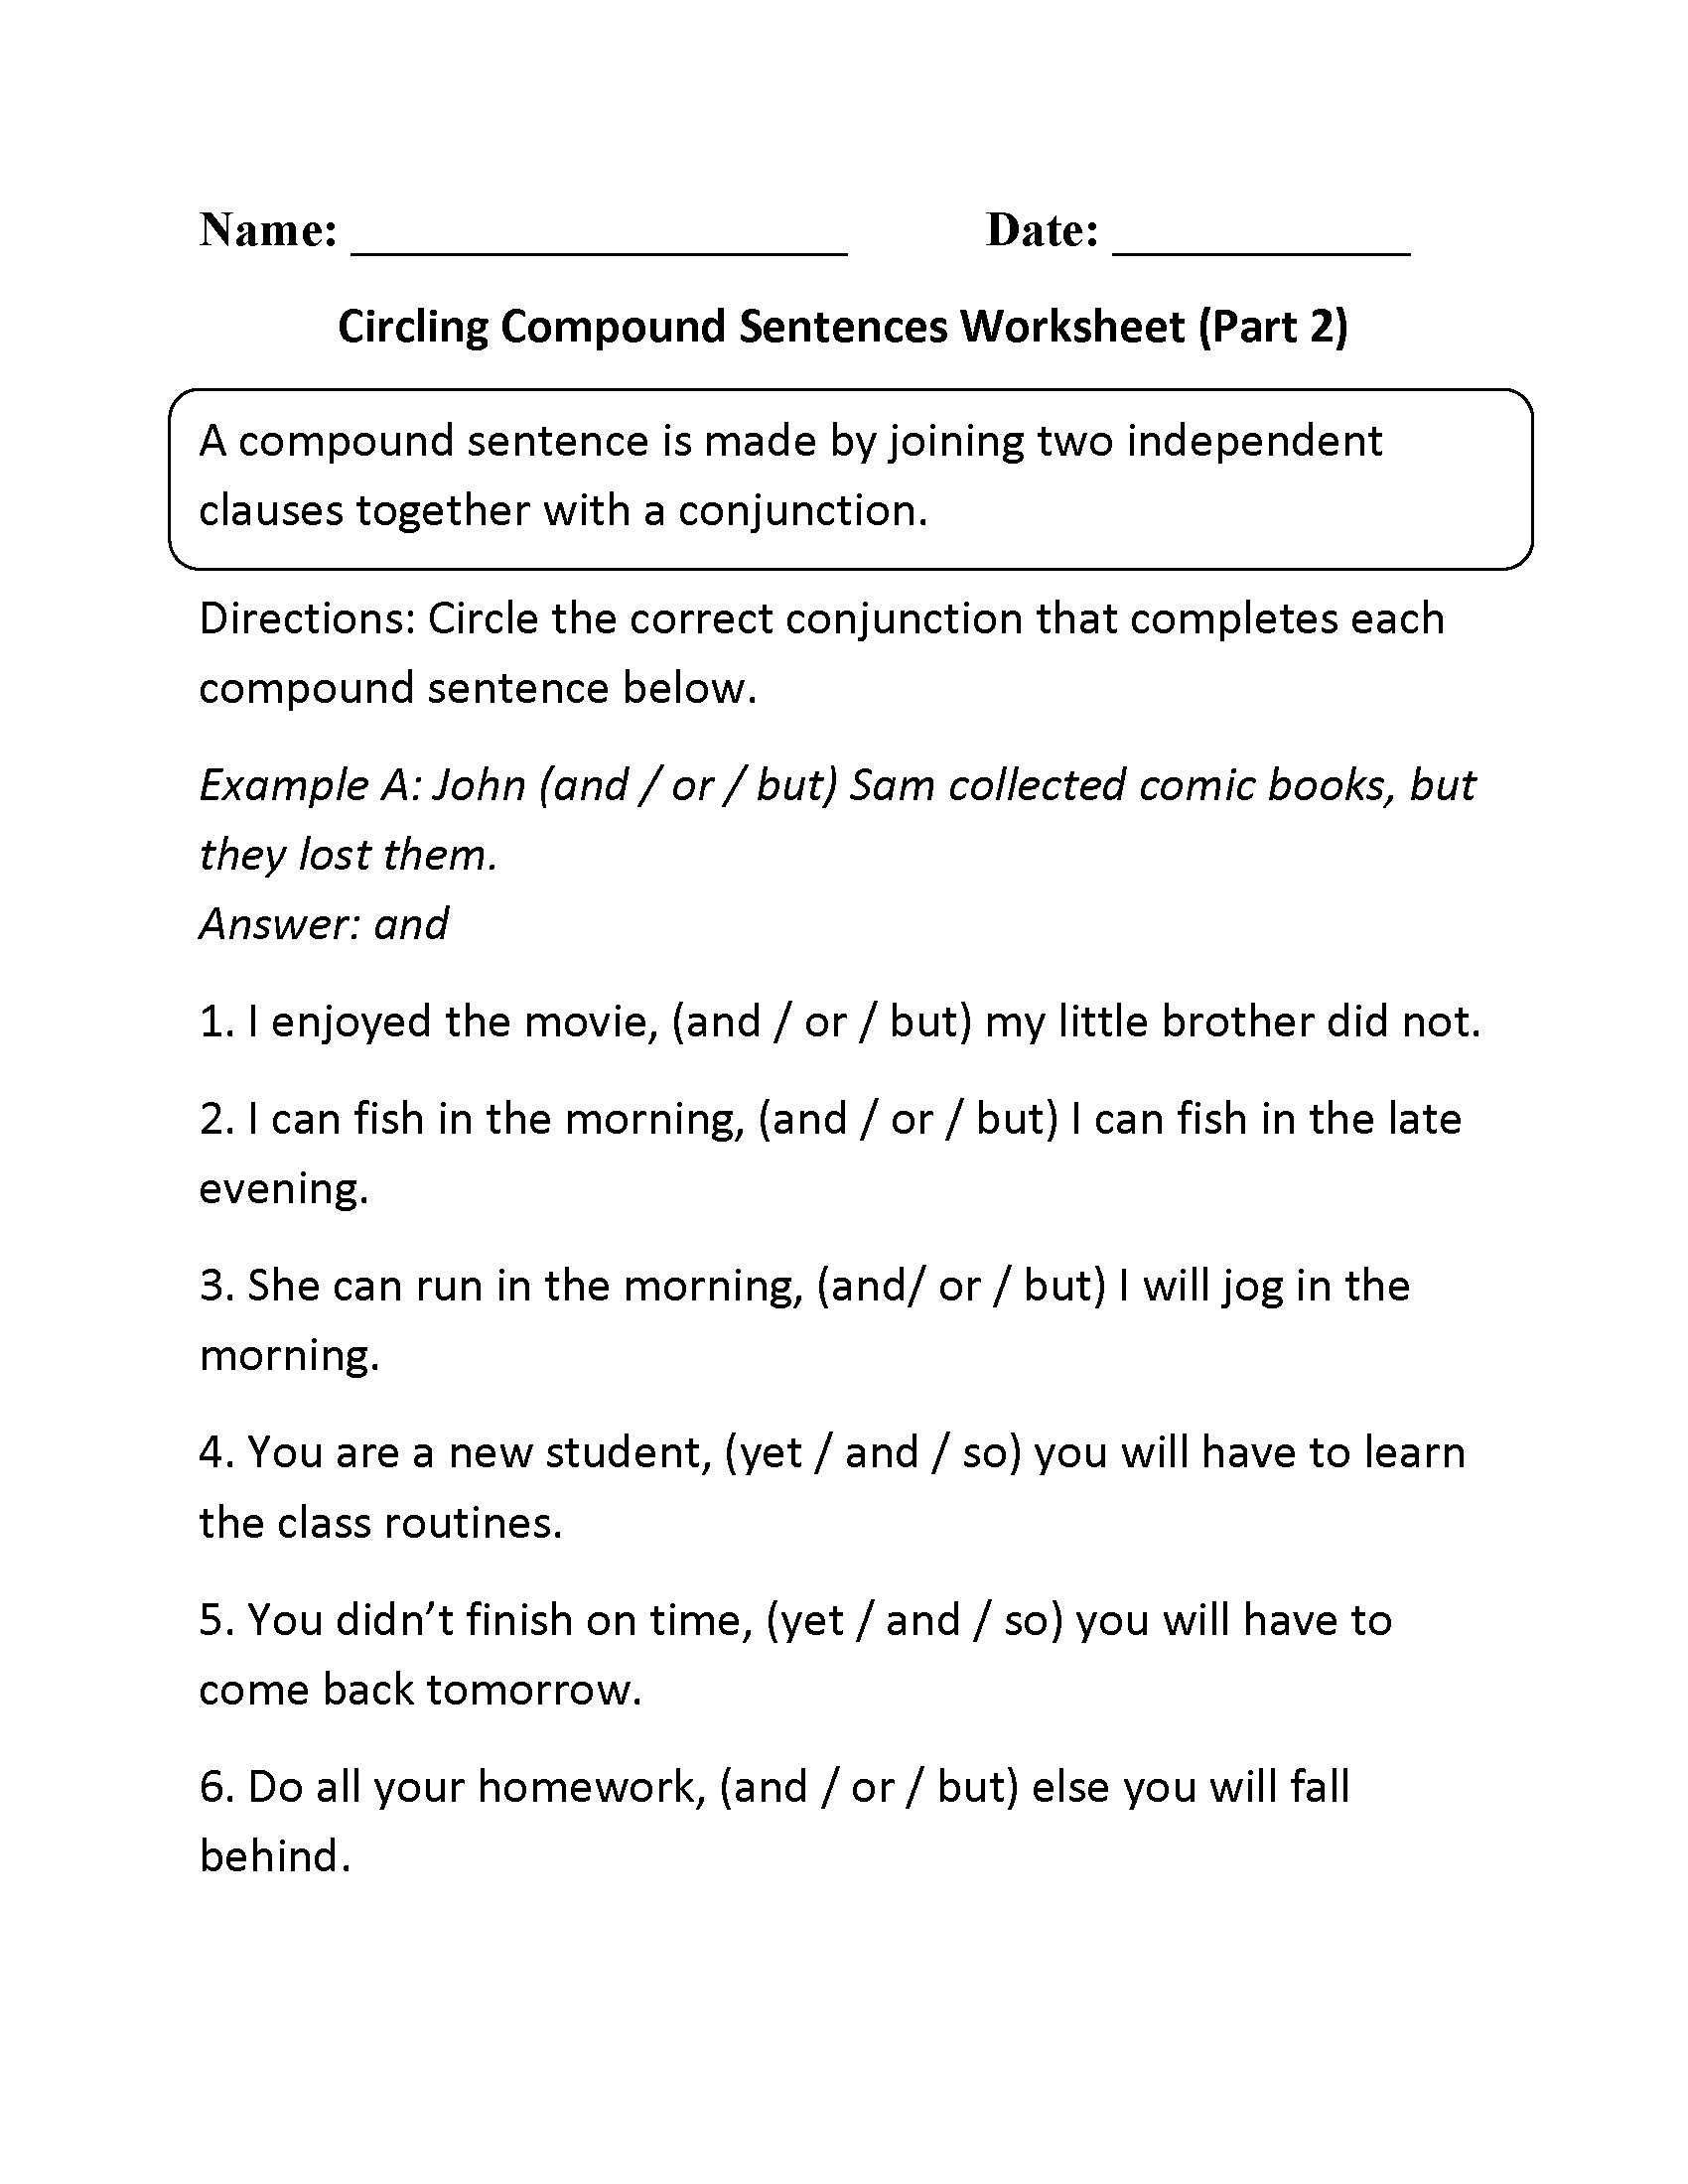 Free Sentence Scramble Worksheets together with Simple and Pound Sentences Worksheet Luxury Scrambled Sentences